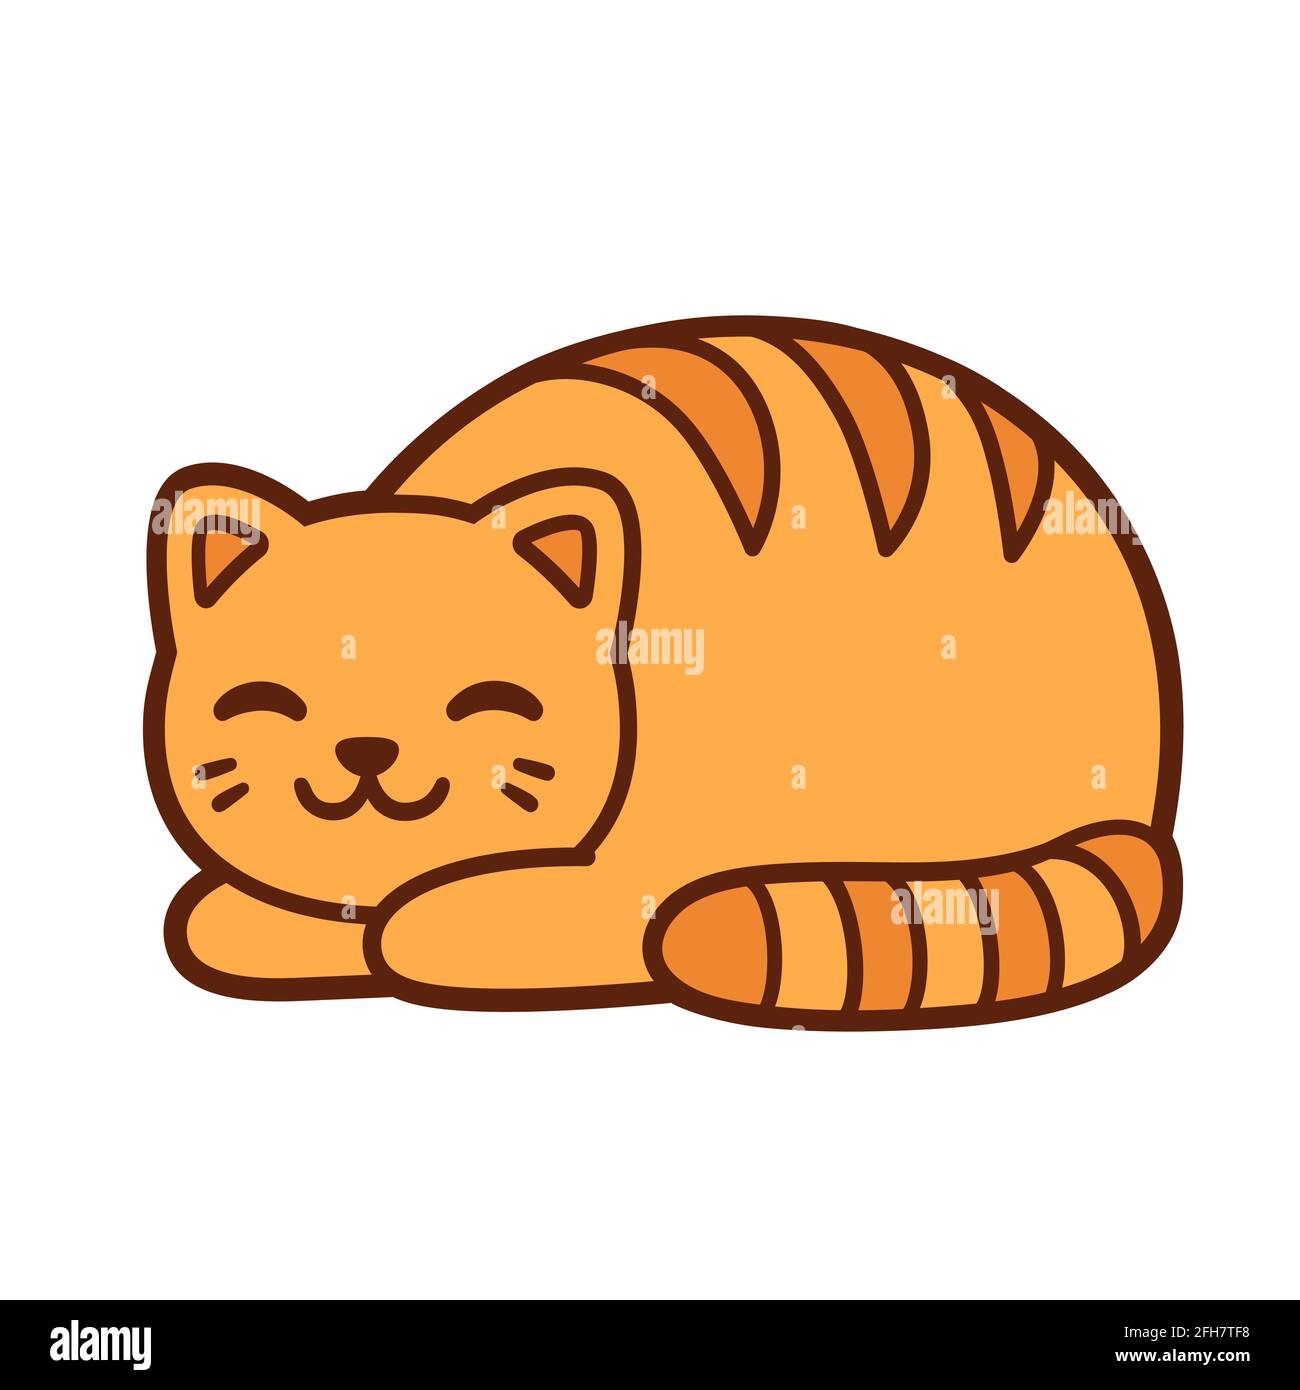 Cat loaf, cute orange cat that looks like a loaf of bread. Simple cartoon drawing, vector illustration. Stock Vector